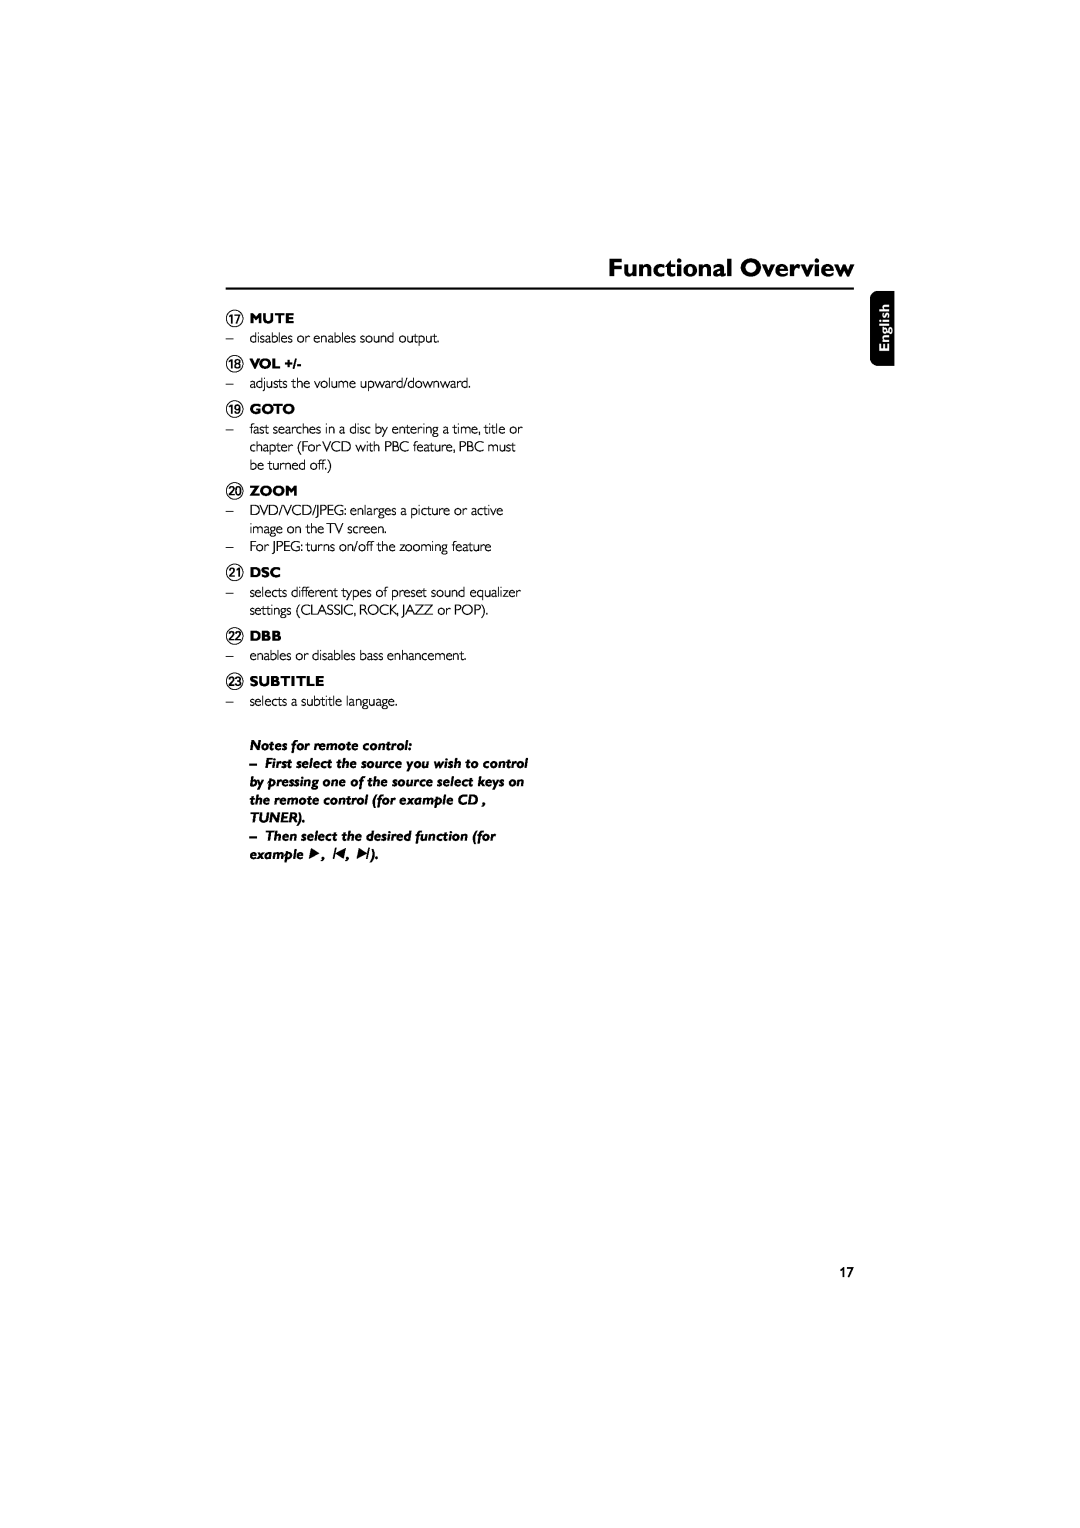 Philips MCD139B owner manual Functional Overview, Mute, Vol +, Goto, Zoom, ¡Dsc, £Subtitle, English 